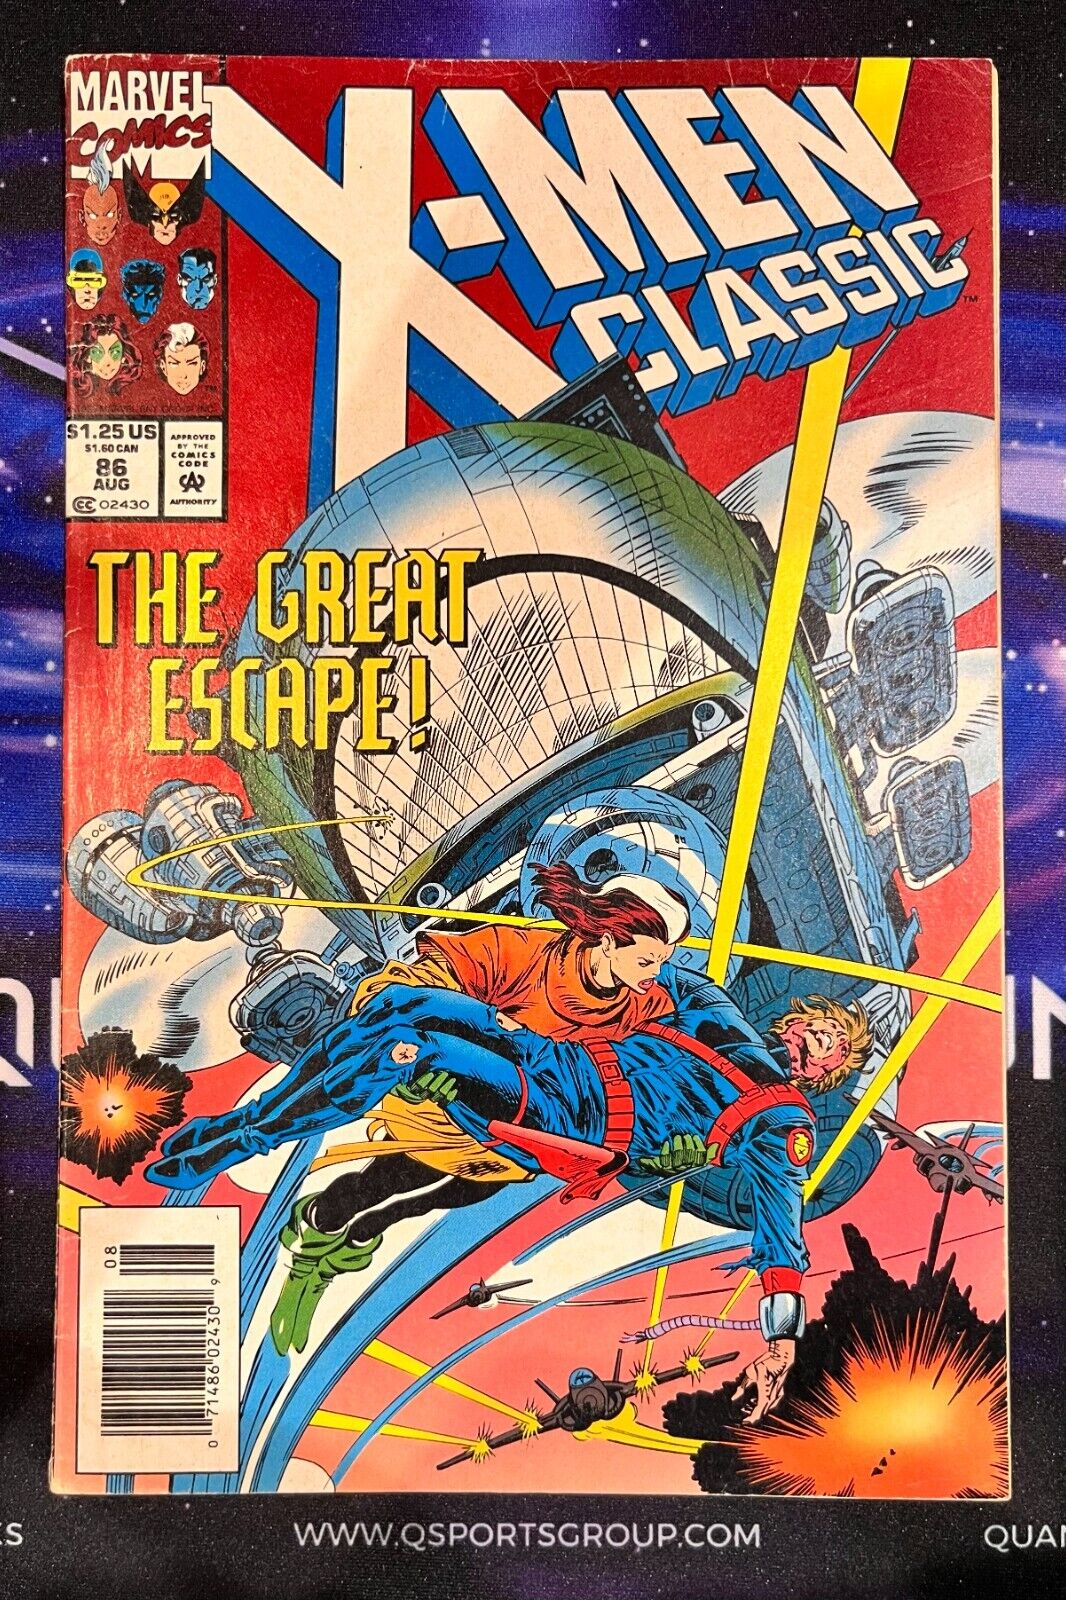 X-men Classic #86 (Aug. 93') Rogue/ Orig. Gammill Cover/ Newsstand Marvel (W285)